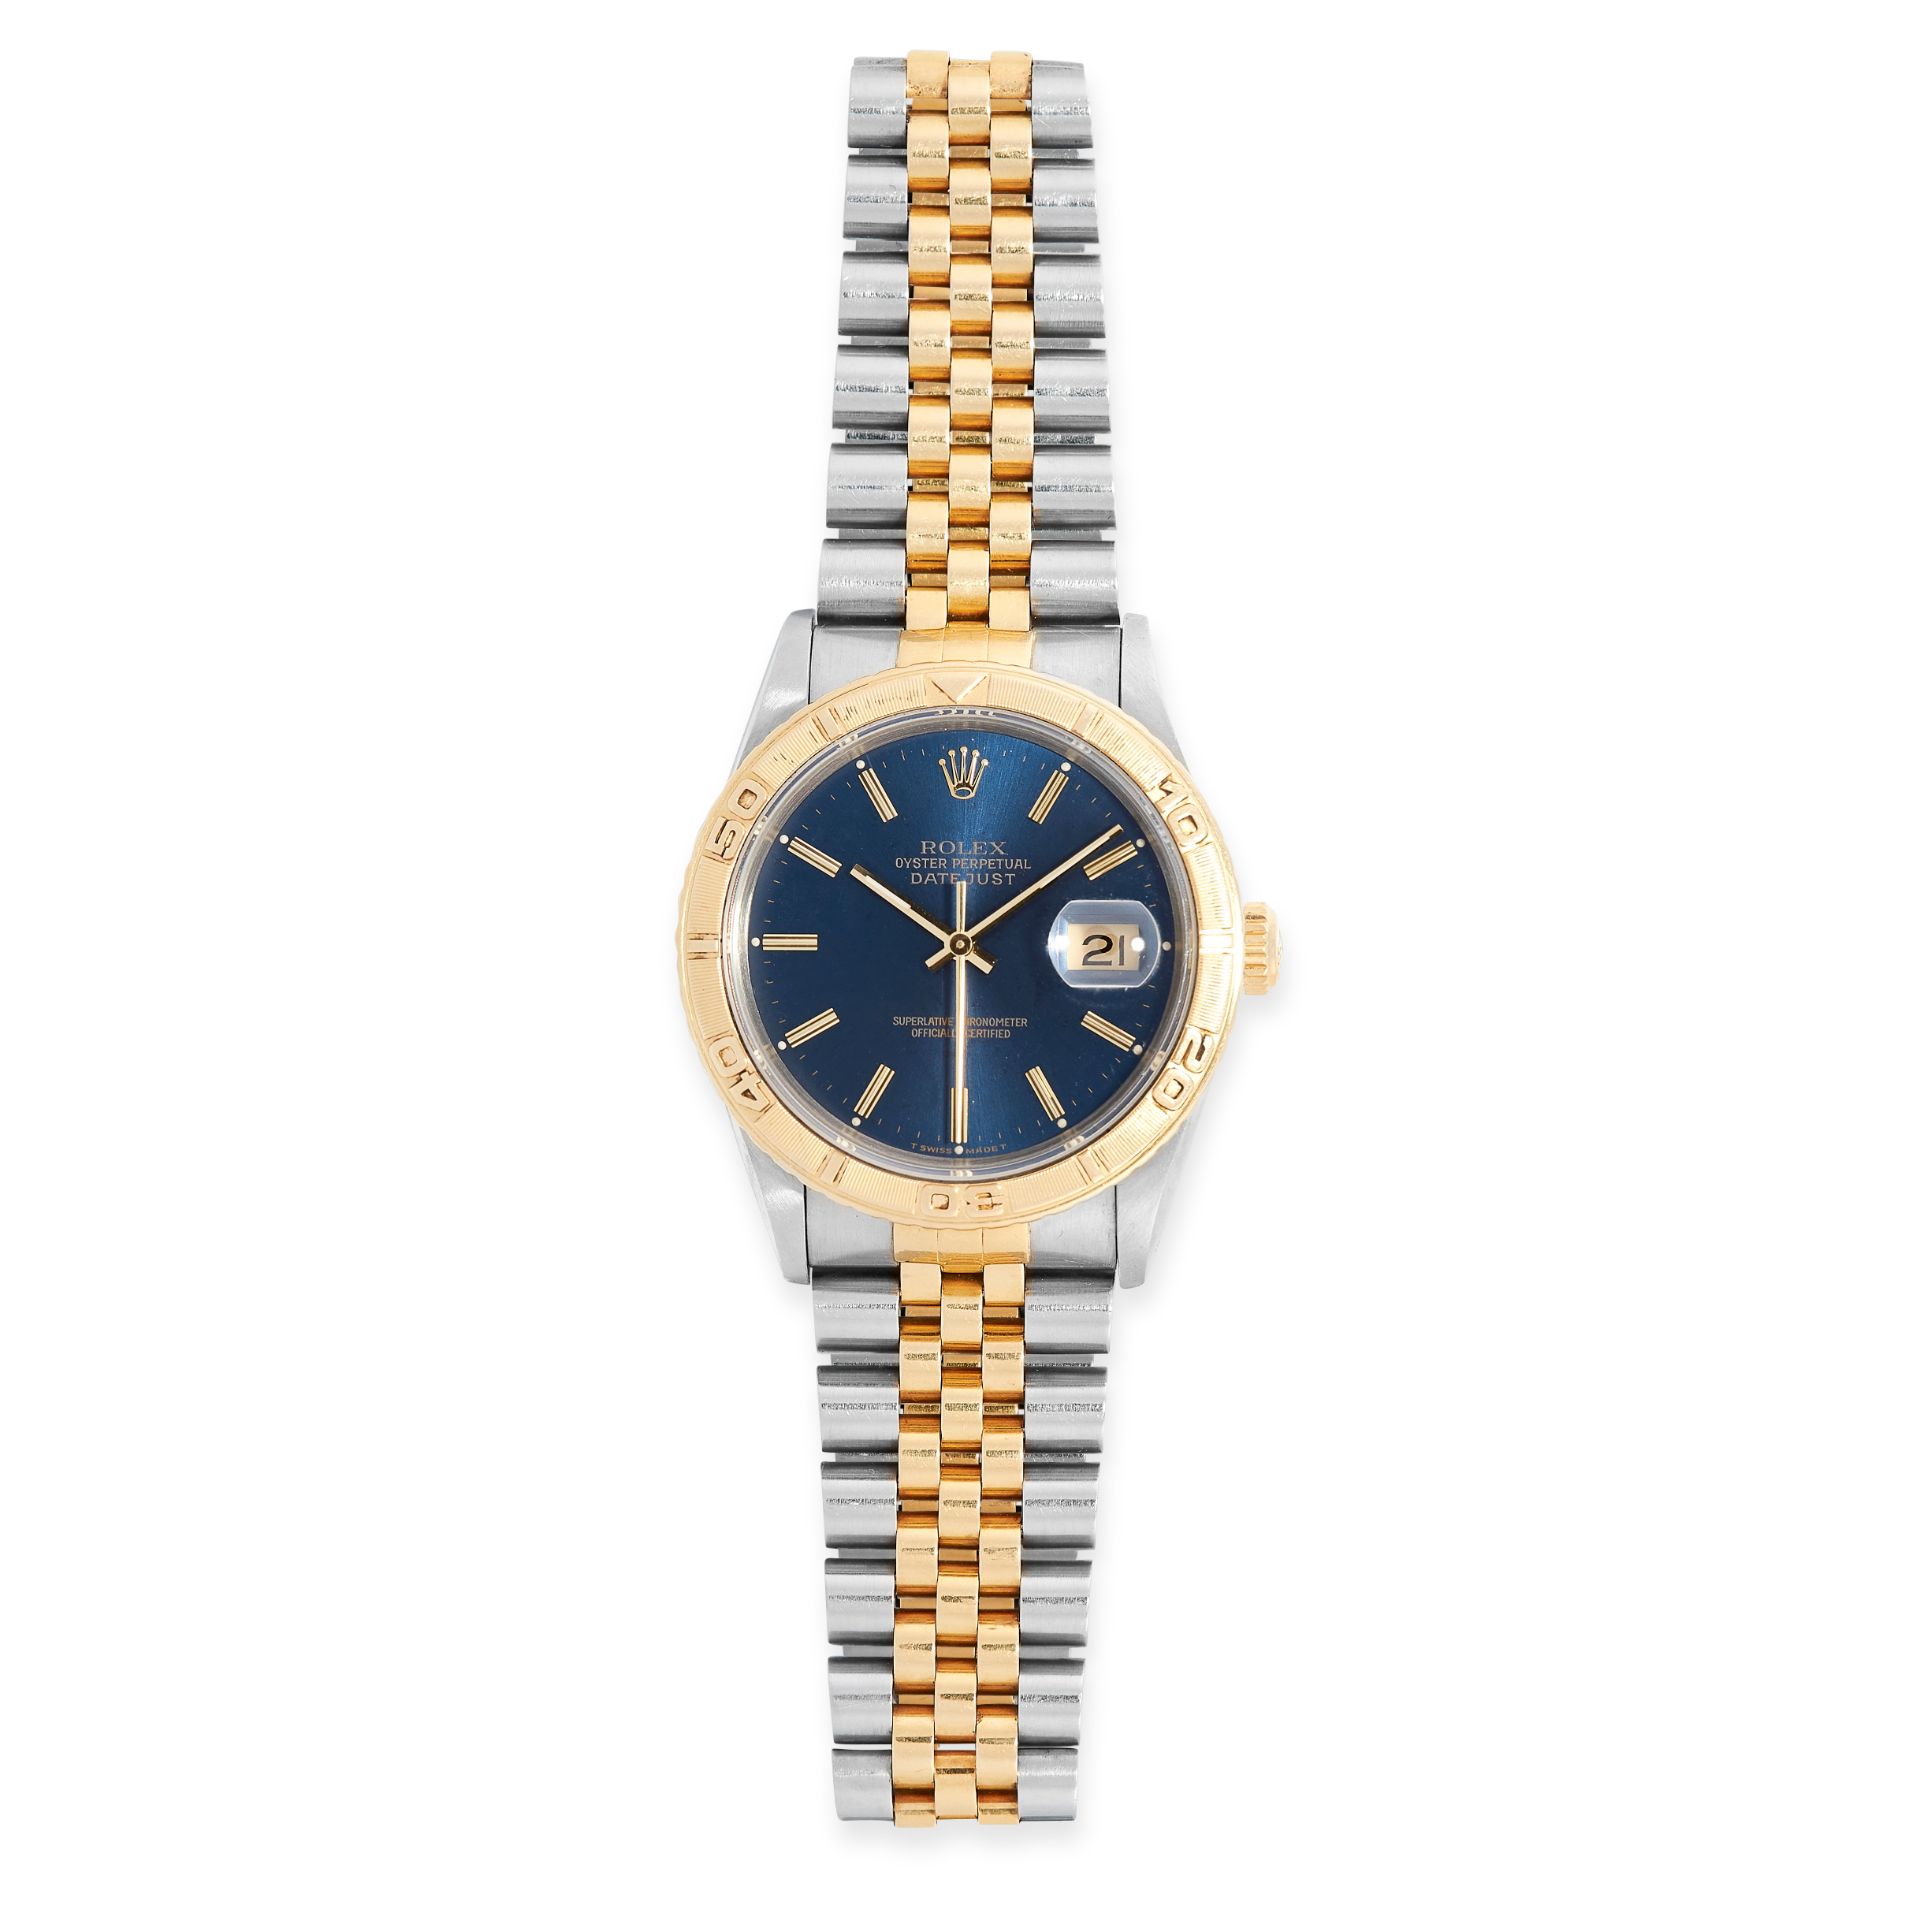 A TURN-O-GRAPH OYSTER PERPETUAL DATEJUST WRIST WATCH, ROLEX in stainless steel and yellow gold, 36mm